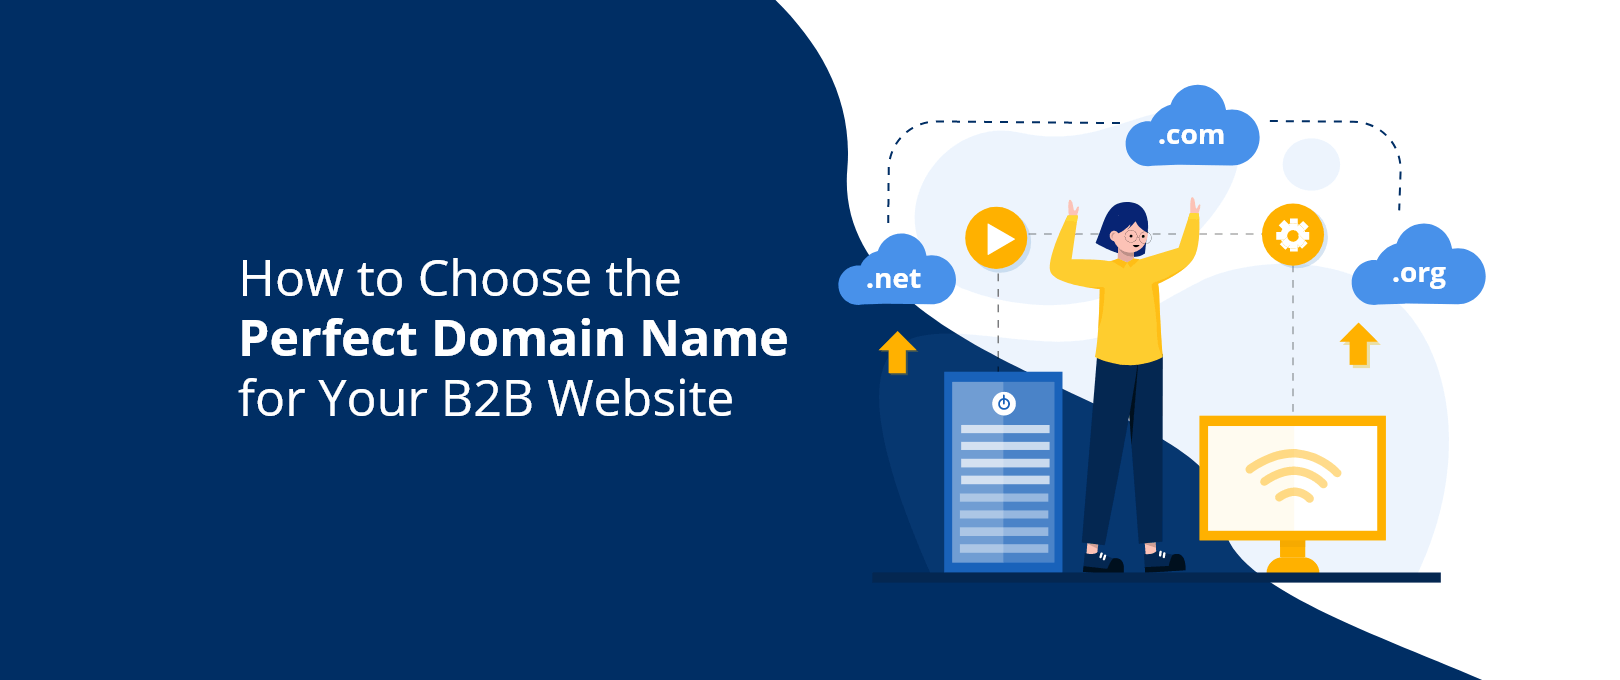 How to Choose the Perfect Domain Name for Your B2B Website ...